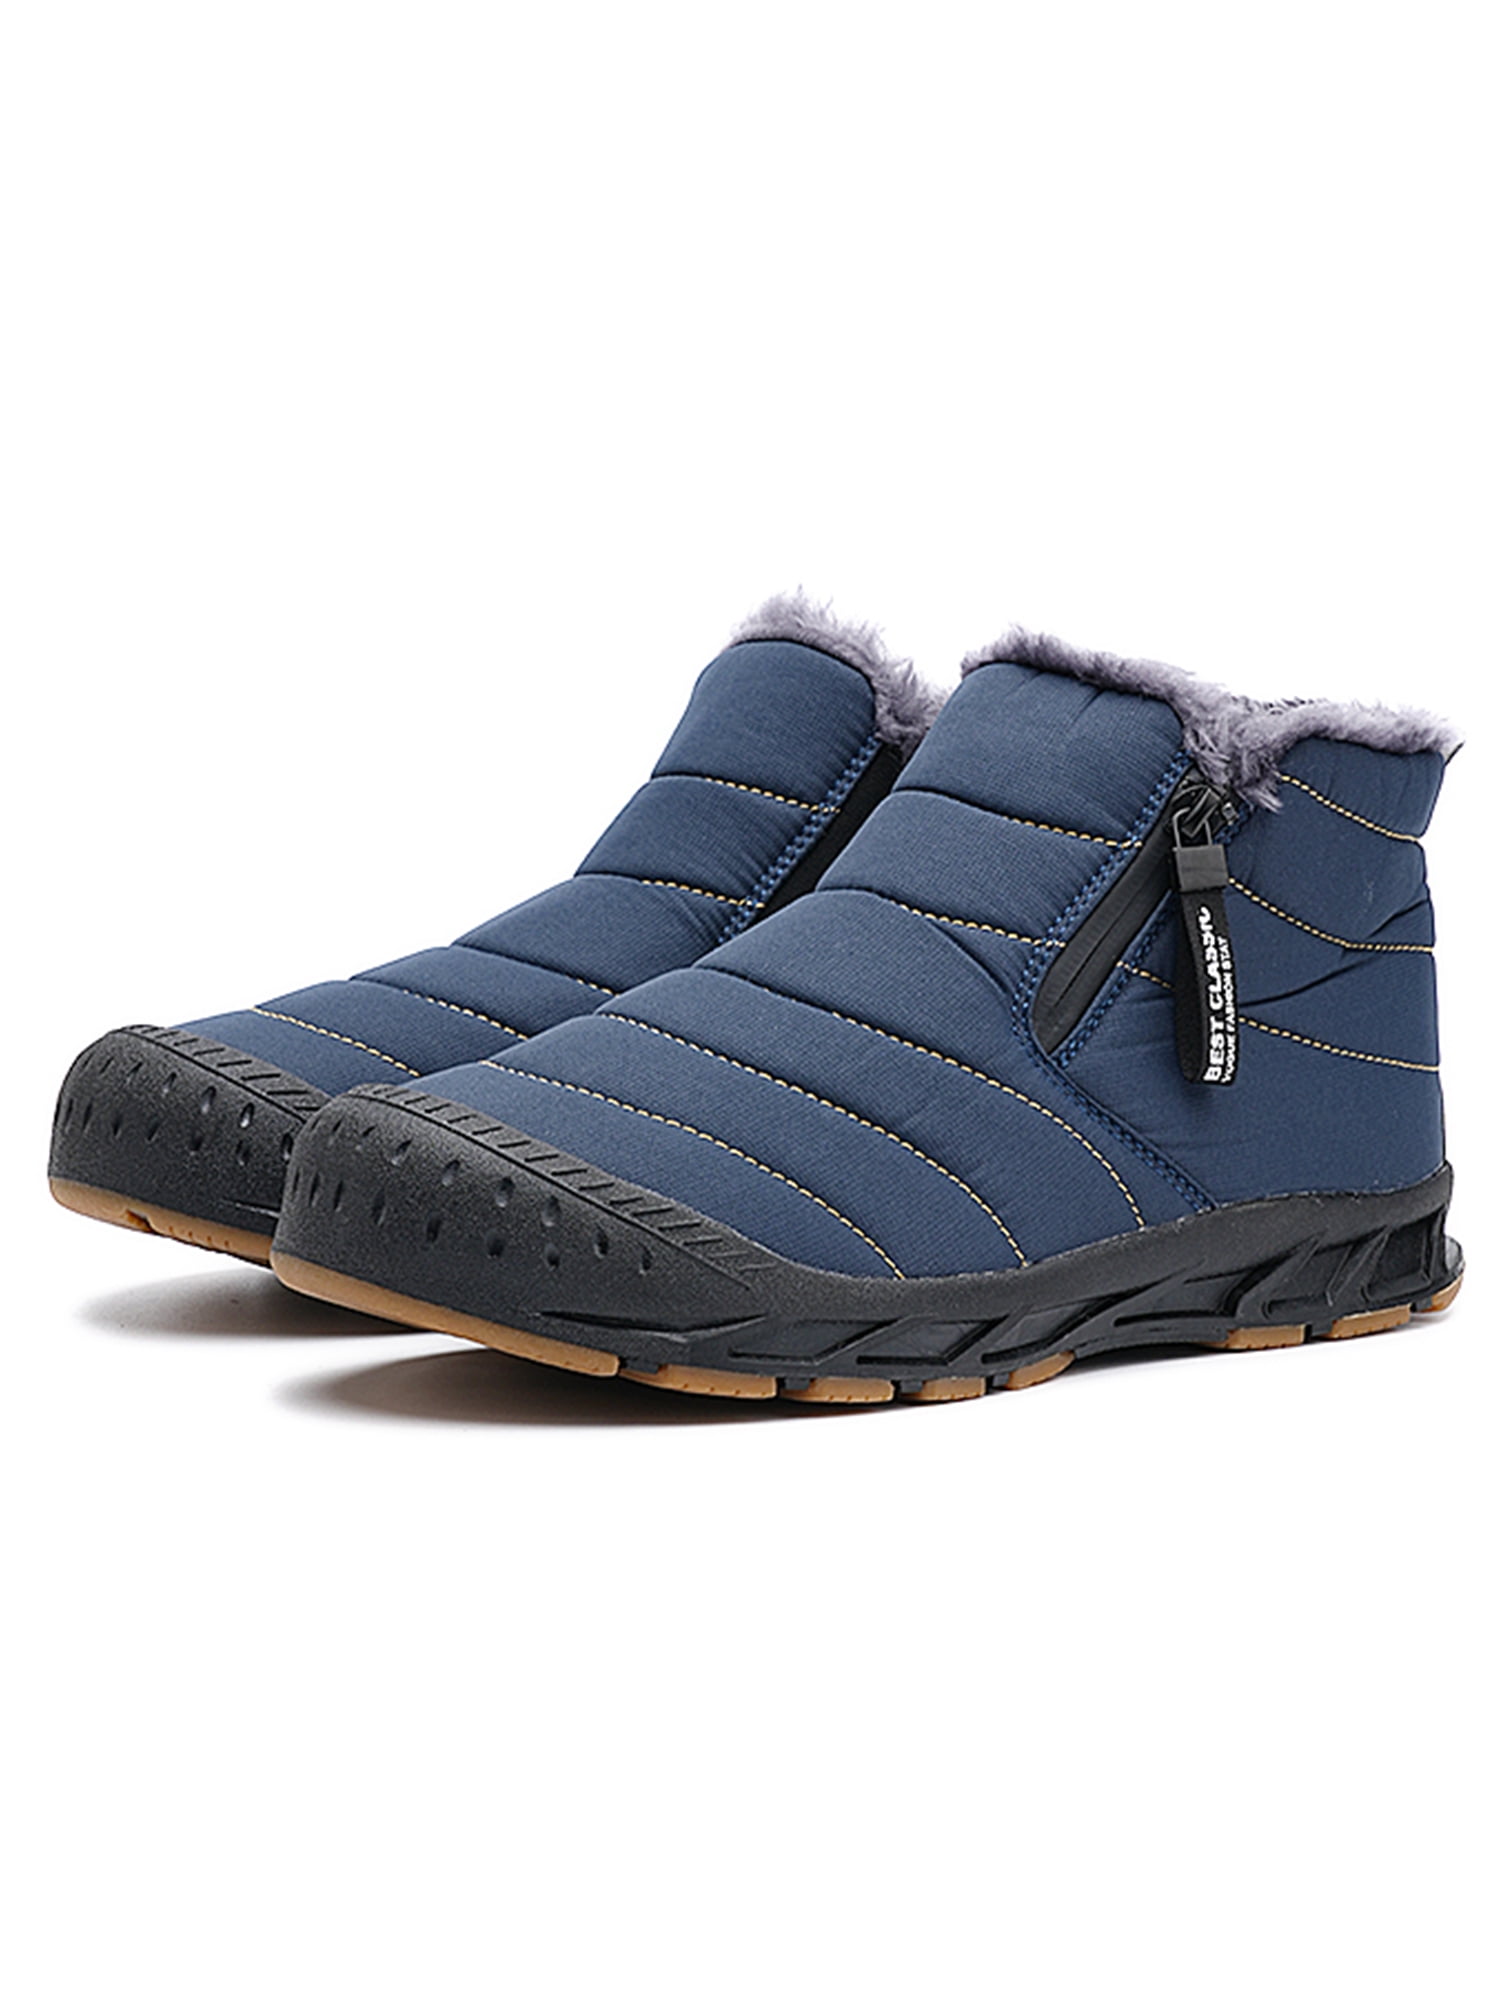 Daeful Mens Snow Boots Outdoor Winter Boot Casual Warm Shoes Cold ...